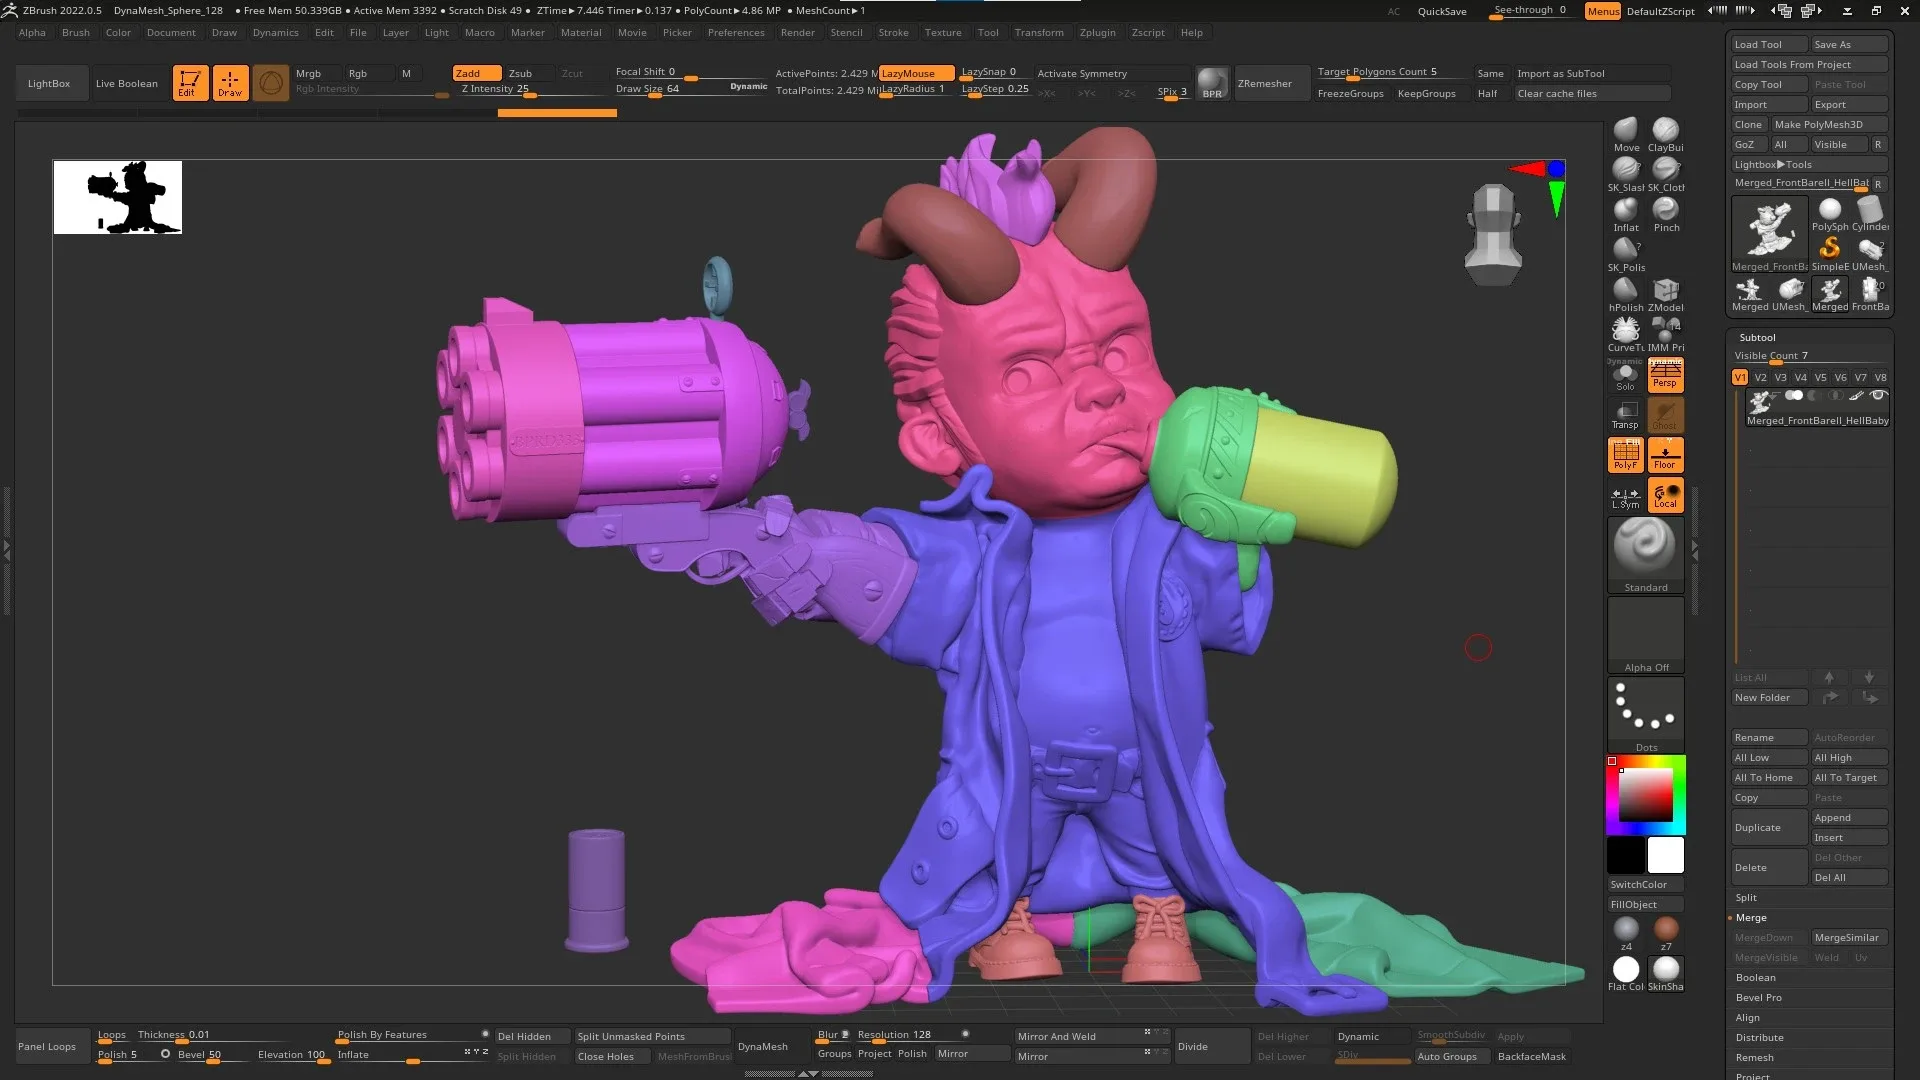 Ready to 3d print Hellbaby figure